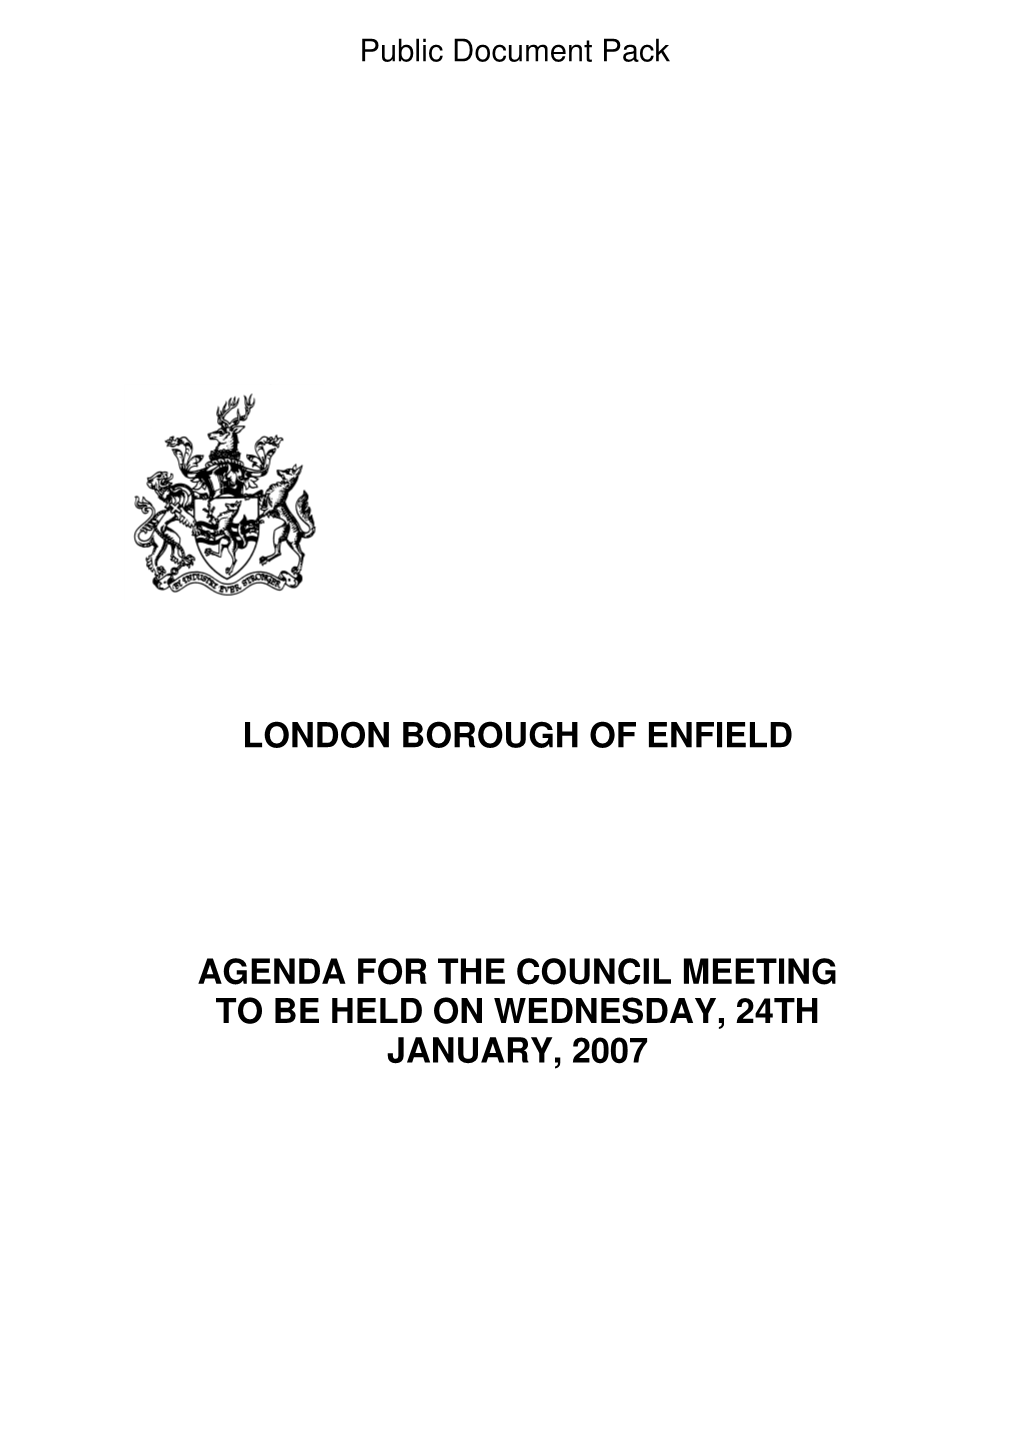 London Borough of Enfield Agenda for the Council